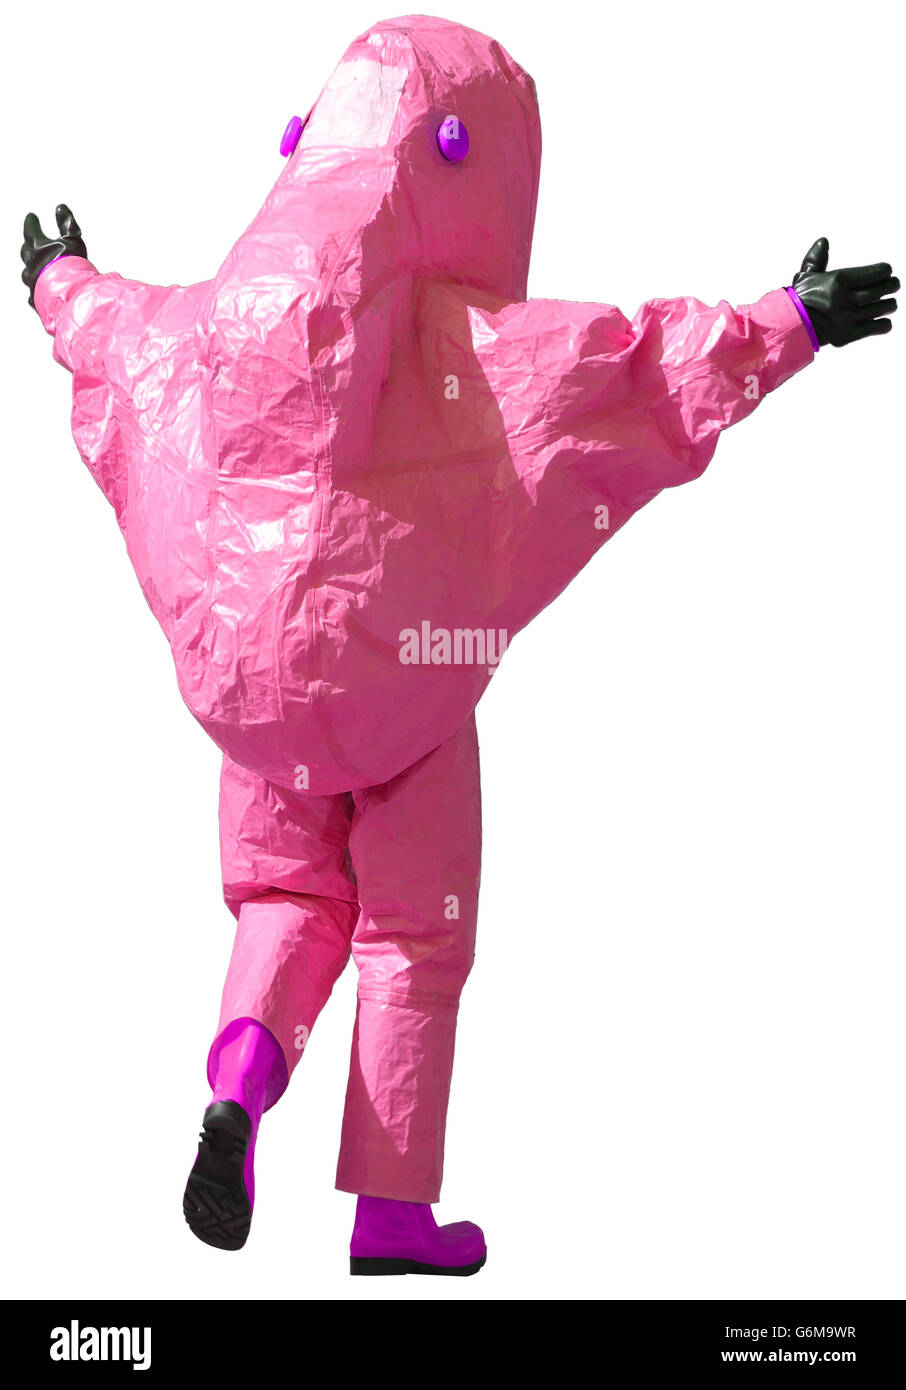 person with magenta protective suit to manage hazardous materials Stock Photo